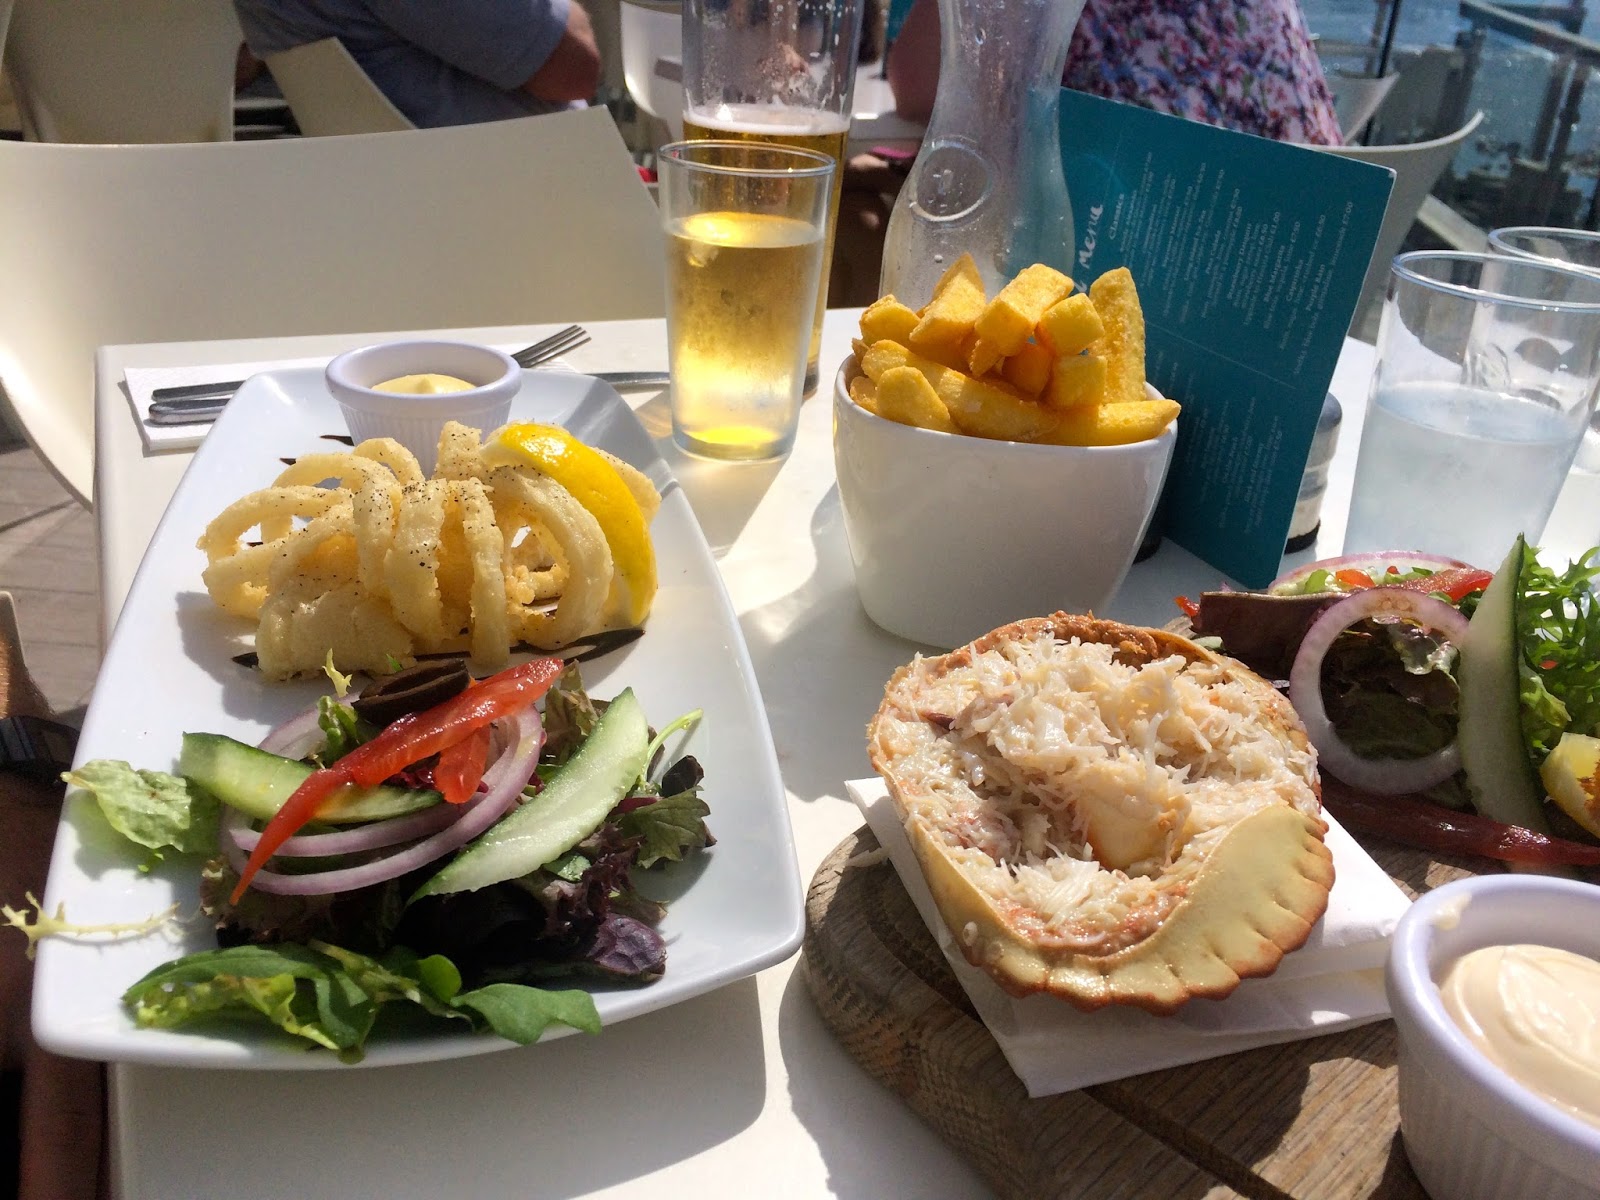 Godolphin Arms Marazion, places to eat in Marazion, food bloggers UK, travel bloggers